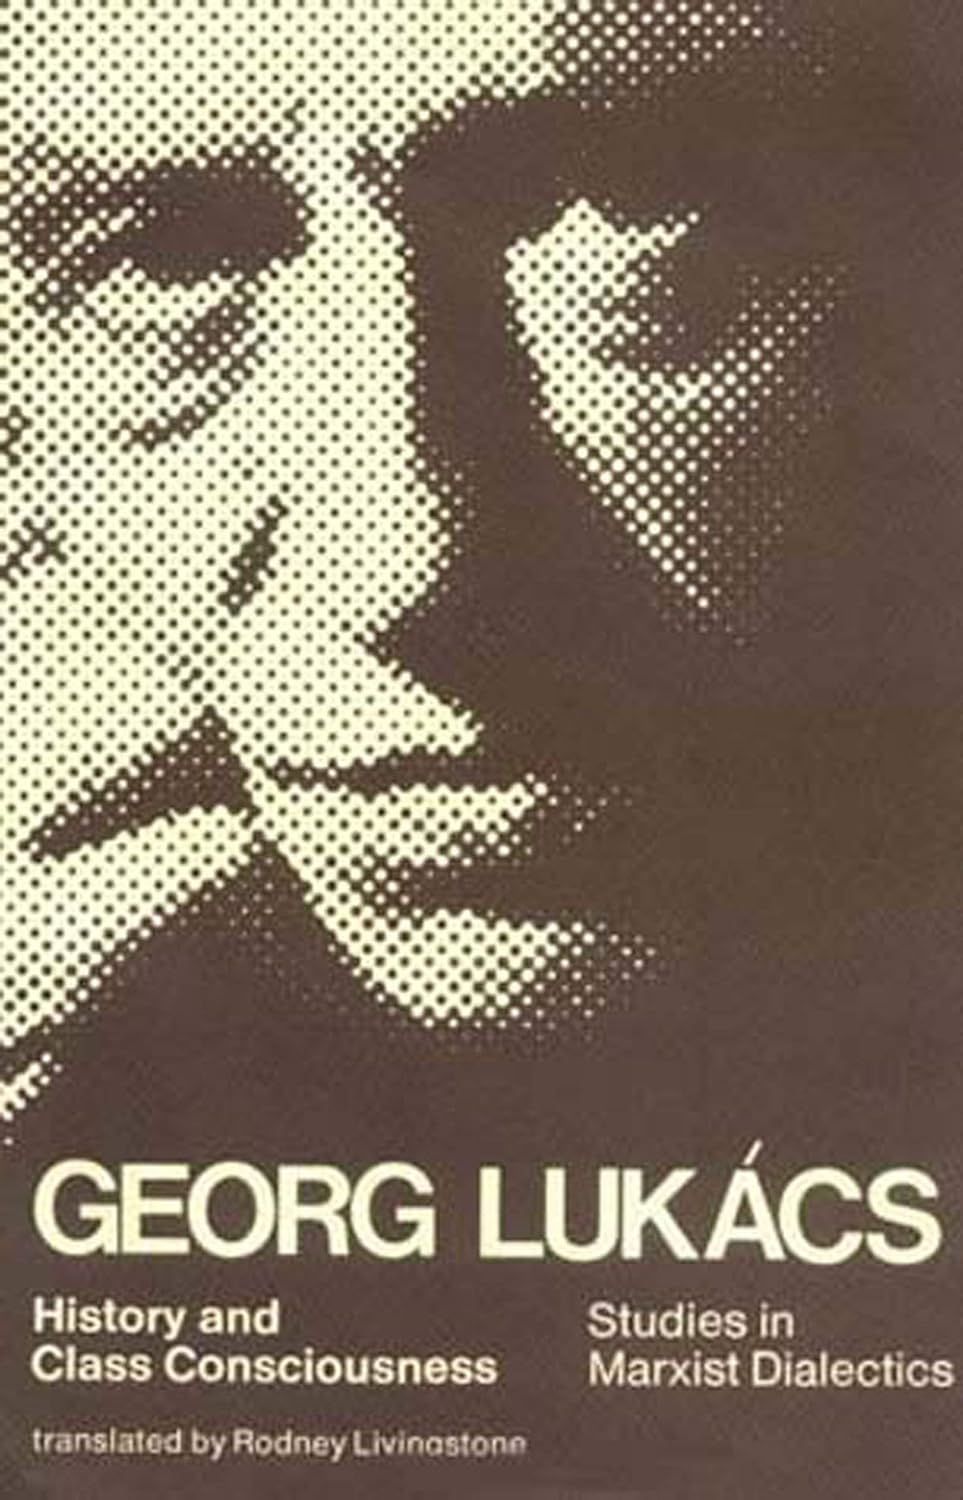 Georg Lukács’s Two Natures: The Centenary of “History and Class Consciousness”